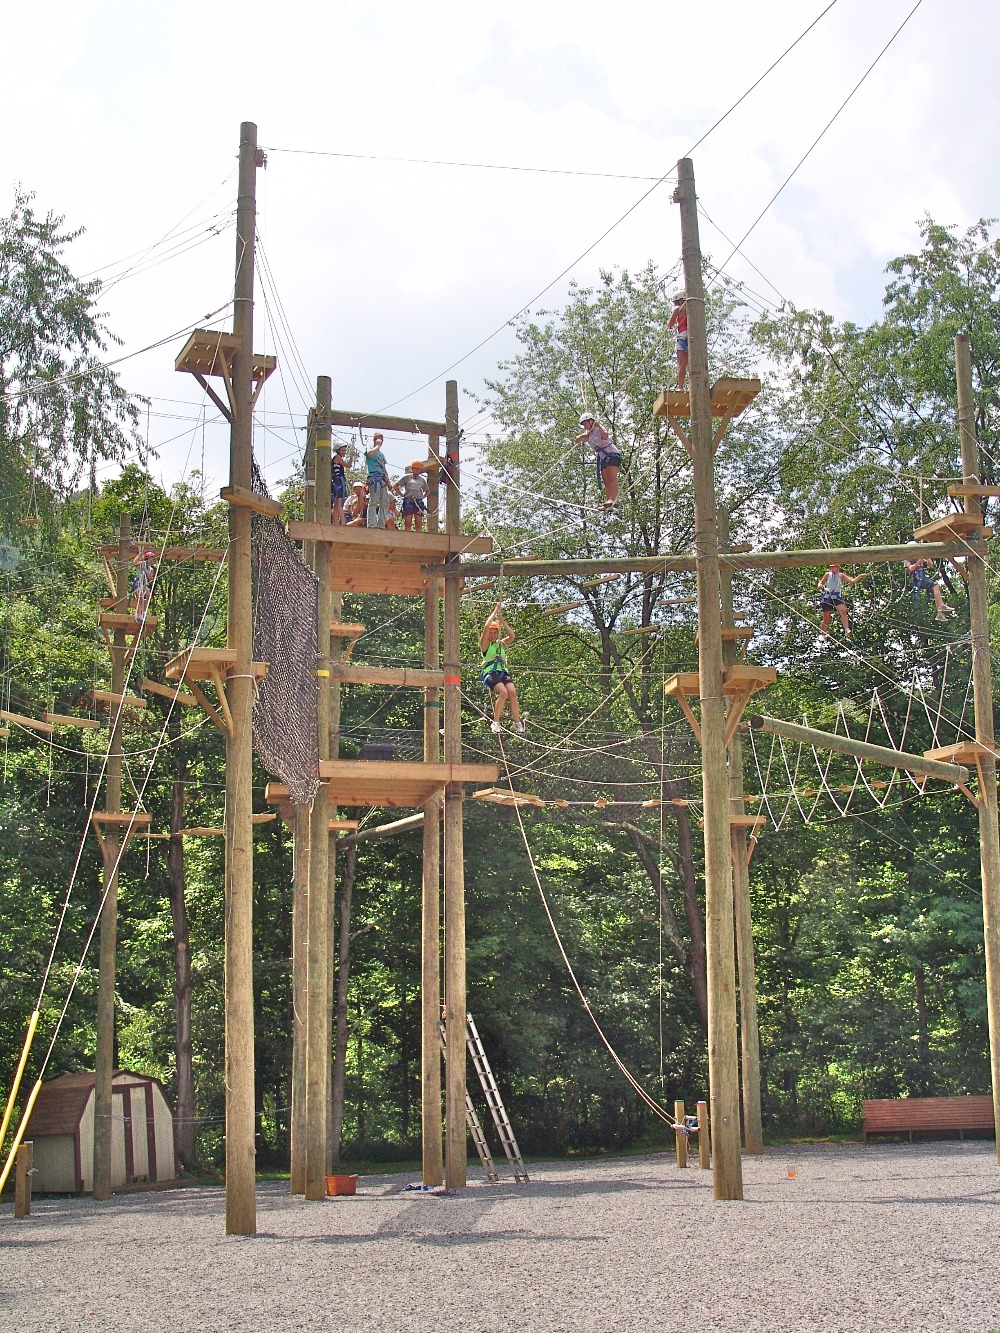 Installing A High Ropes Course by Ken Rutledge - GoFundMe